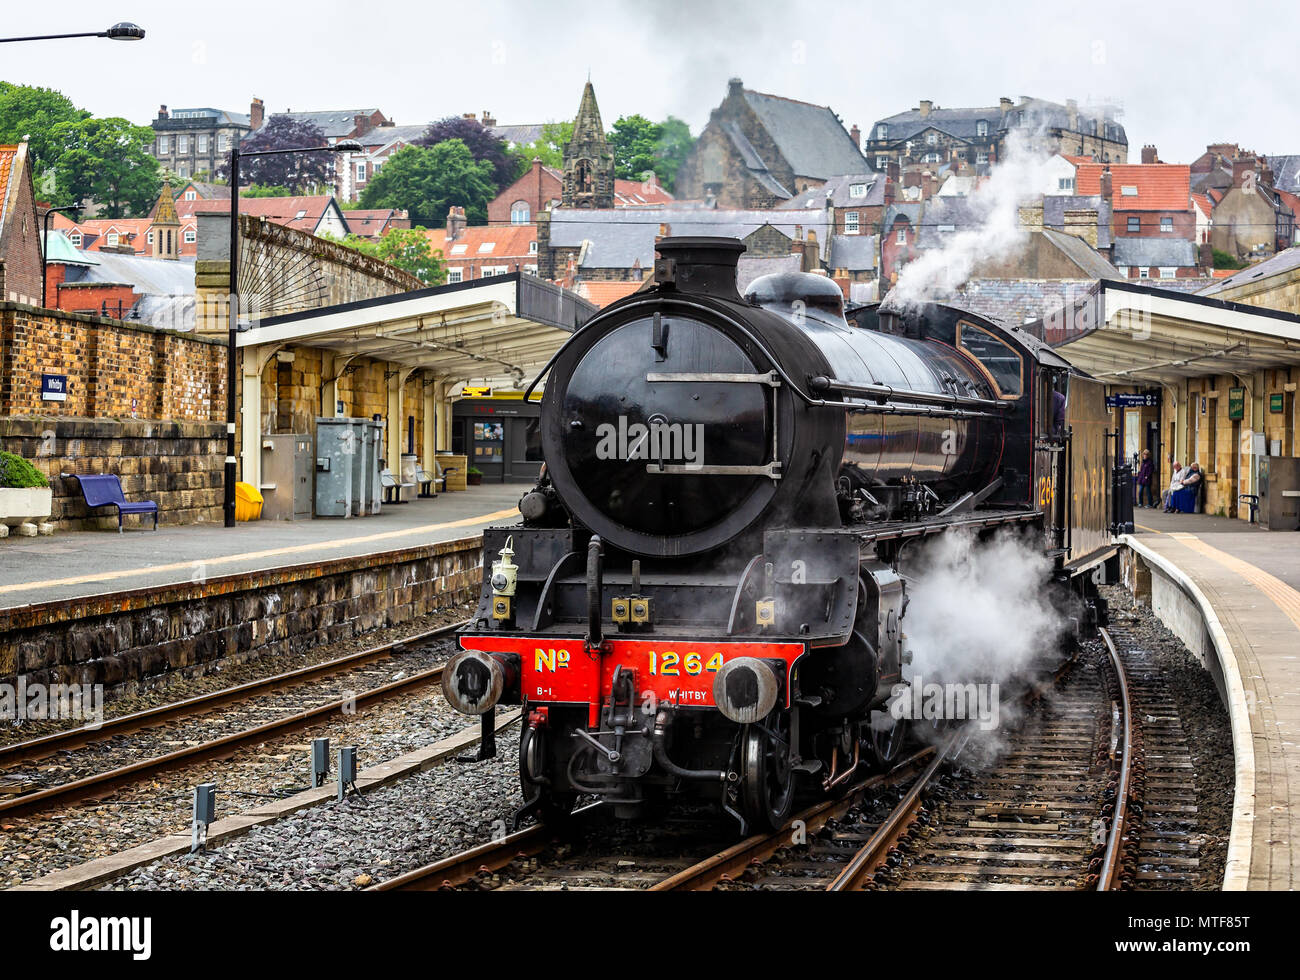 Steam locomotive LNER 1264 pulling out of Whitby station with full head of steam taken in Whitby, Yorkshire, UK on 22 May 2018 Stock Photo